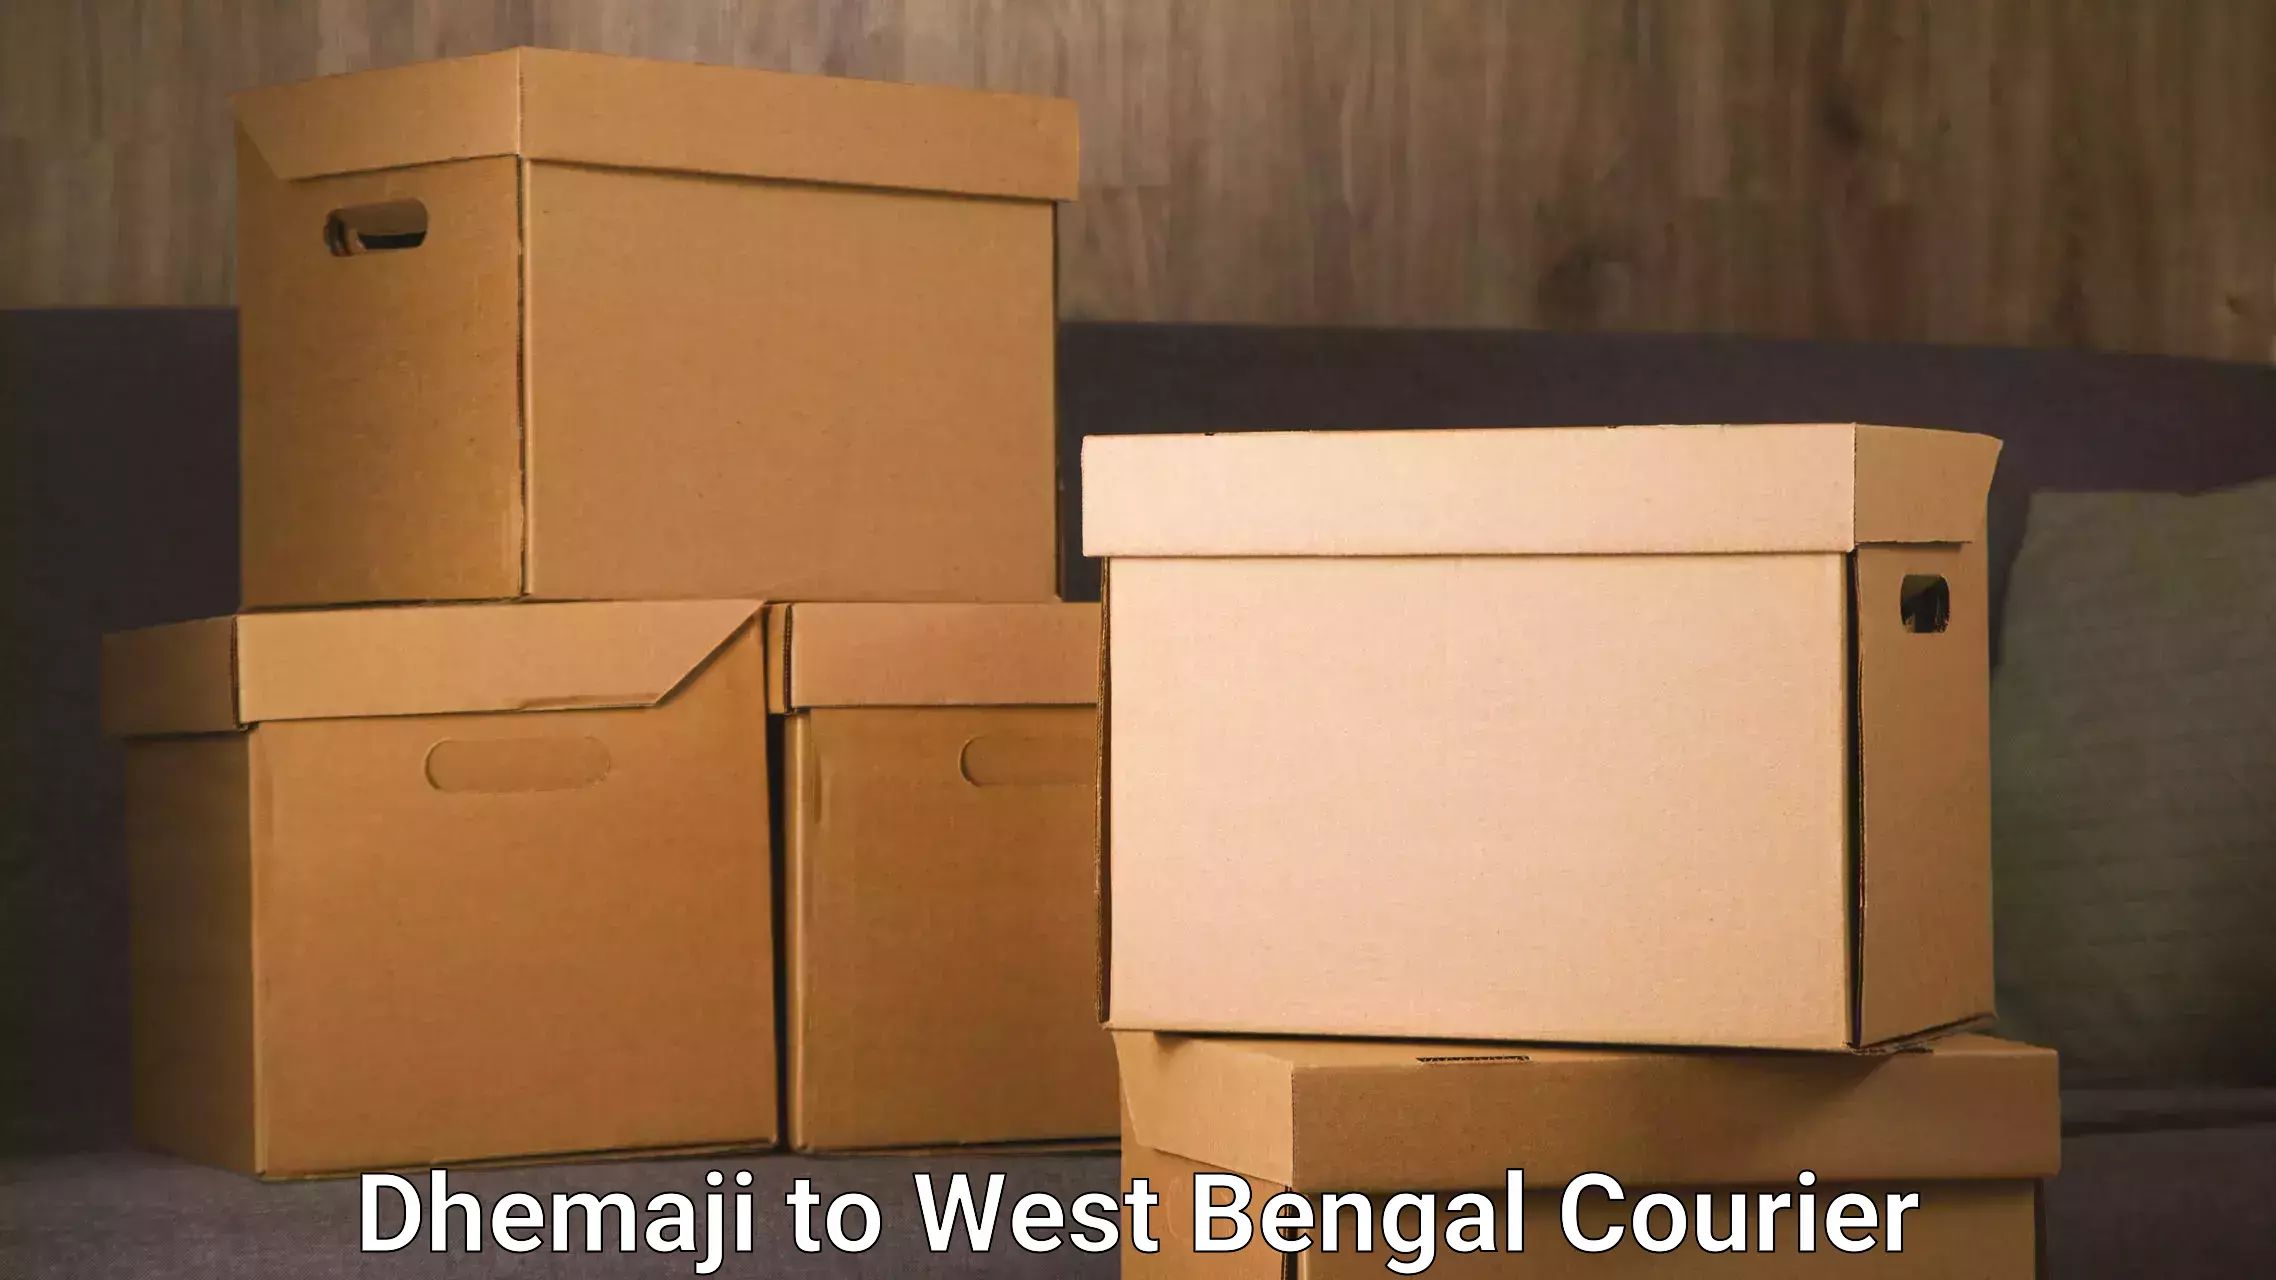 Flexible delivery schedules in Dhemaji to West Bengal